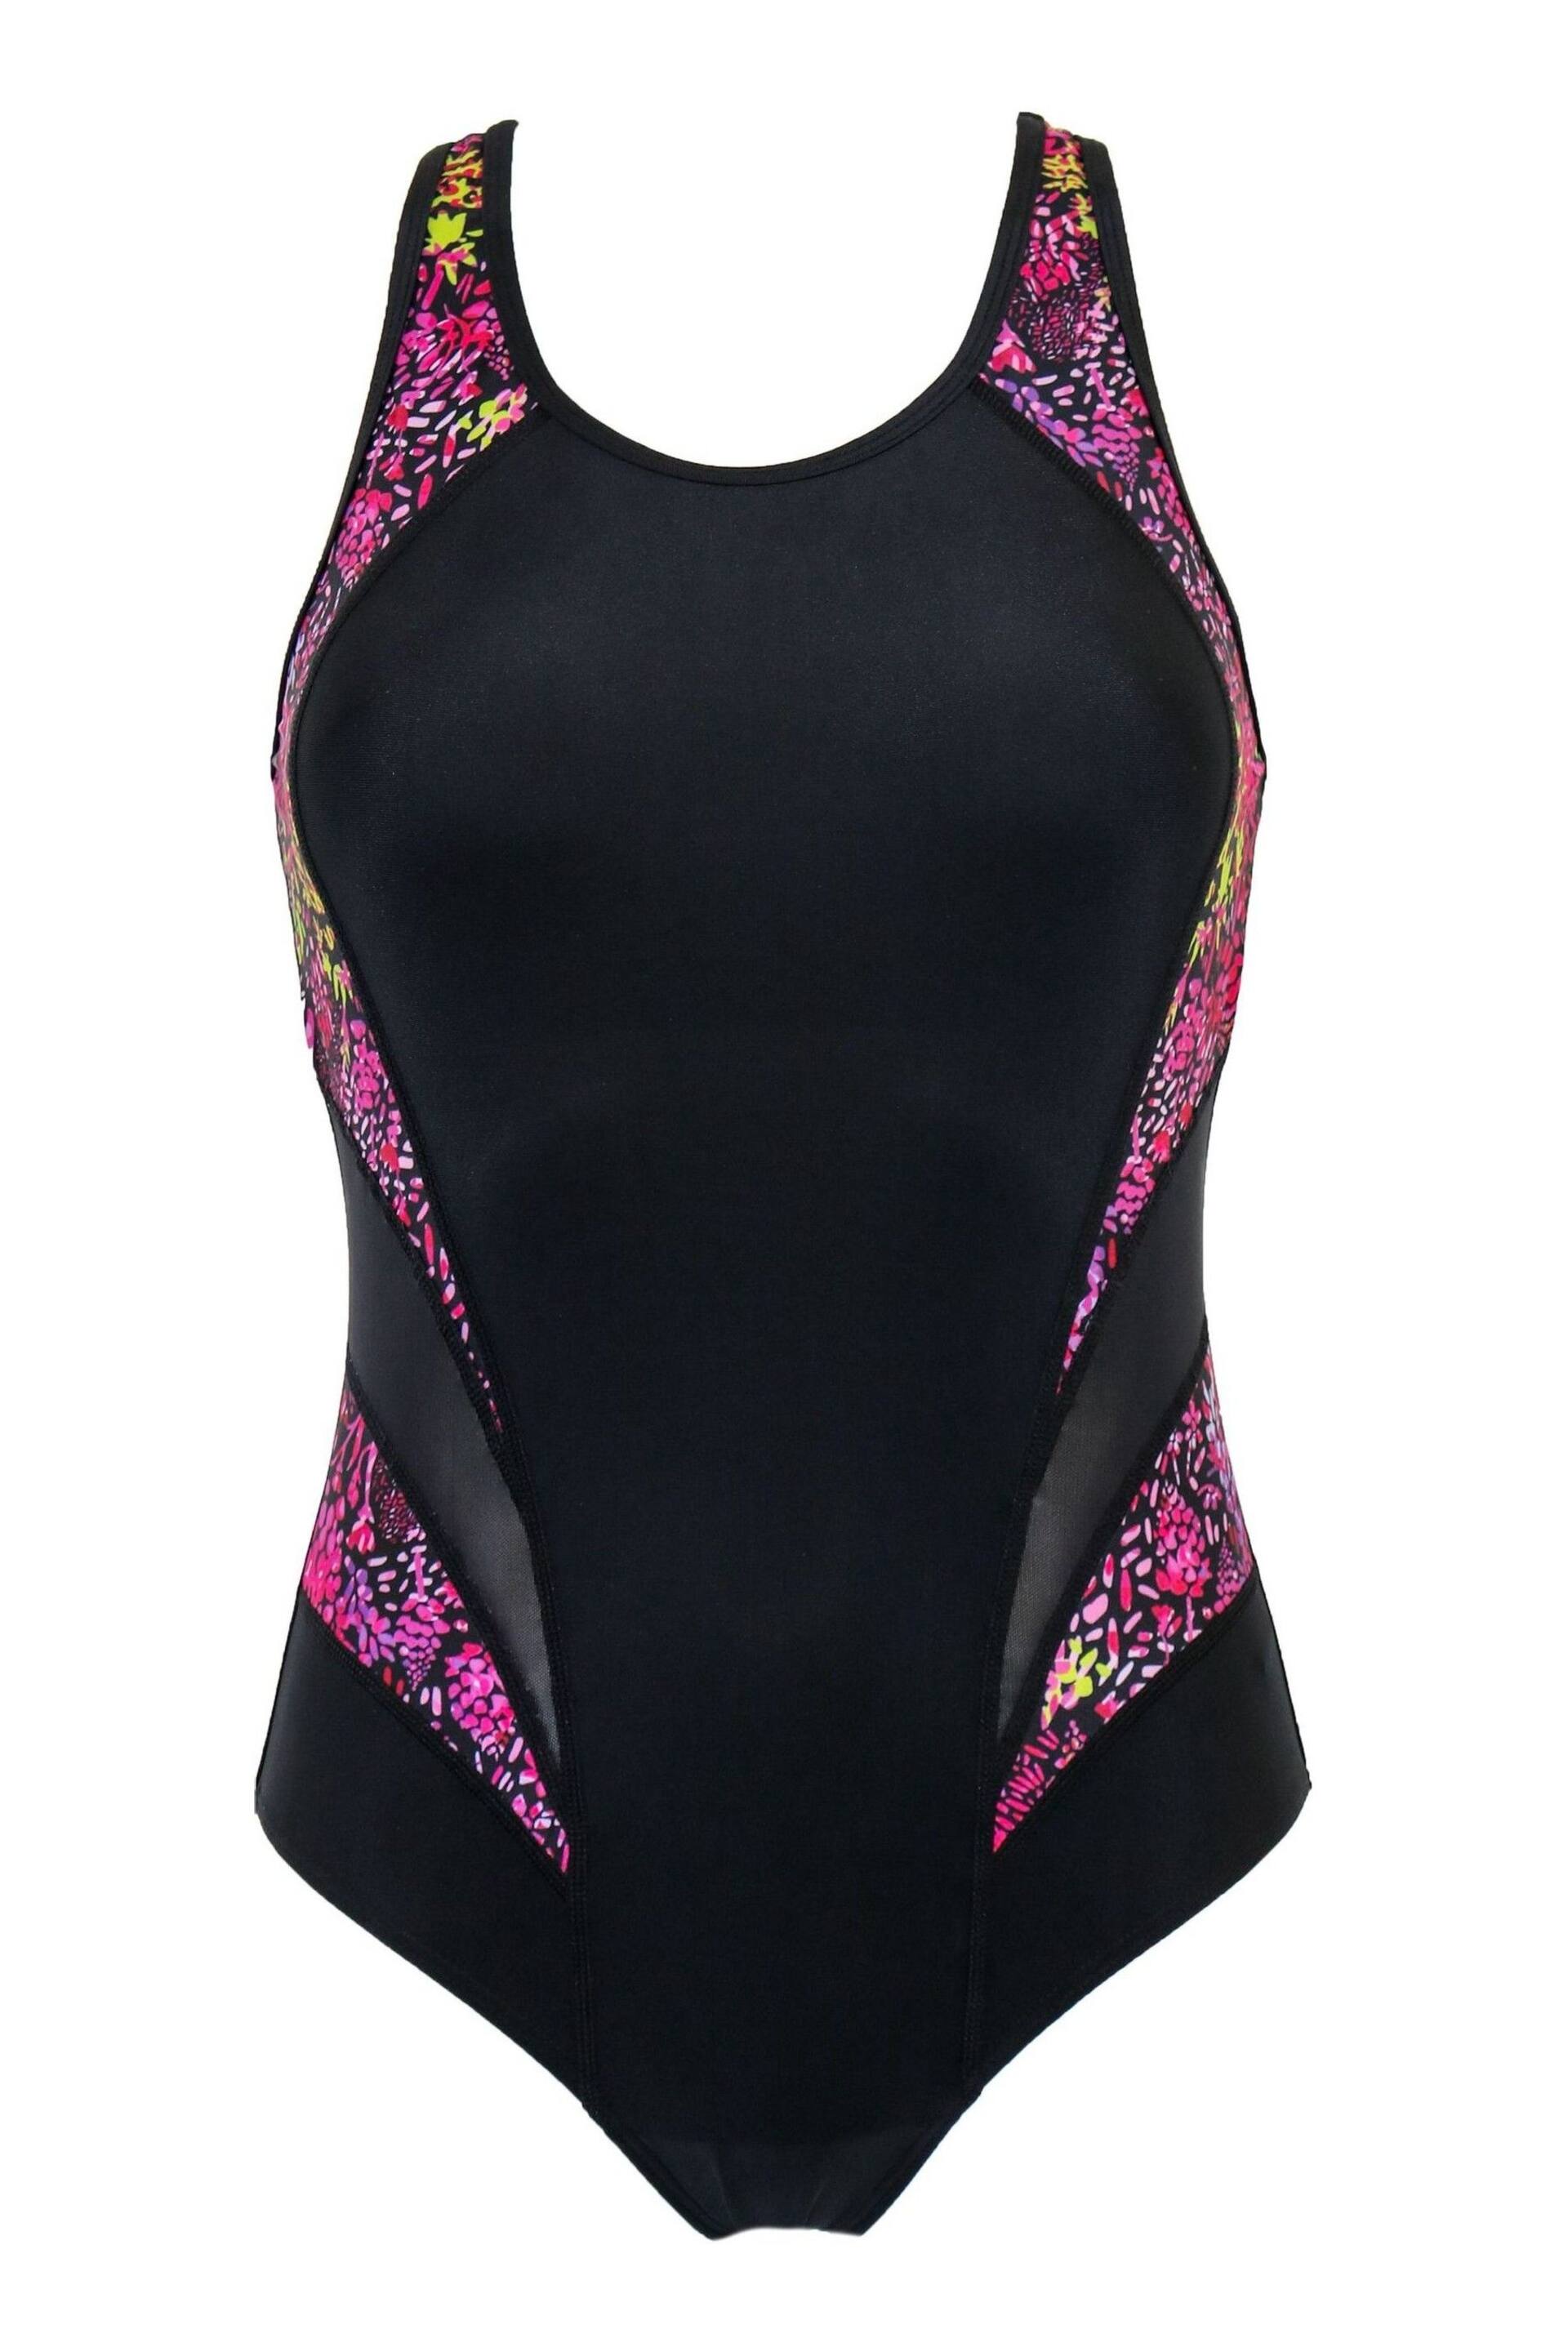 Pour Moi Black & Pink Energy Chlorine Resistant Swimsuit - Image 3 of 4